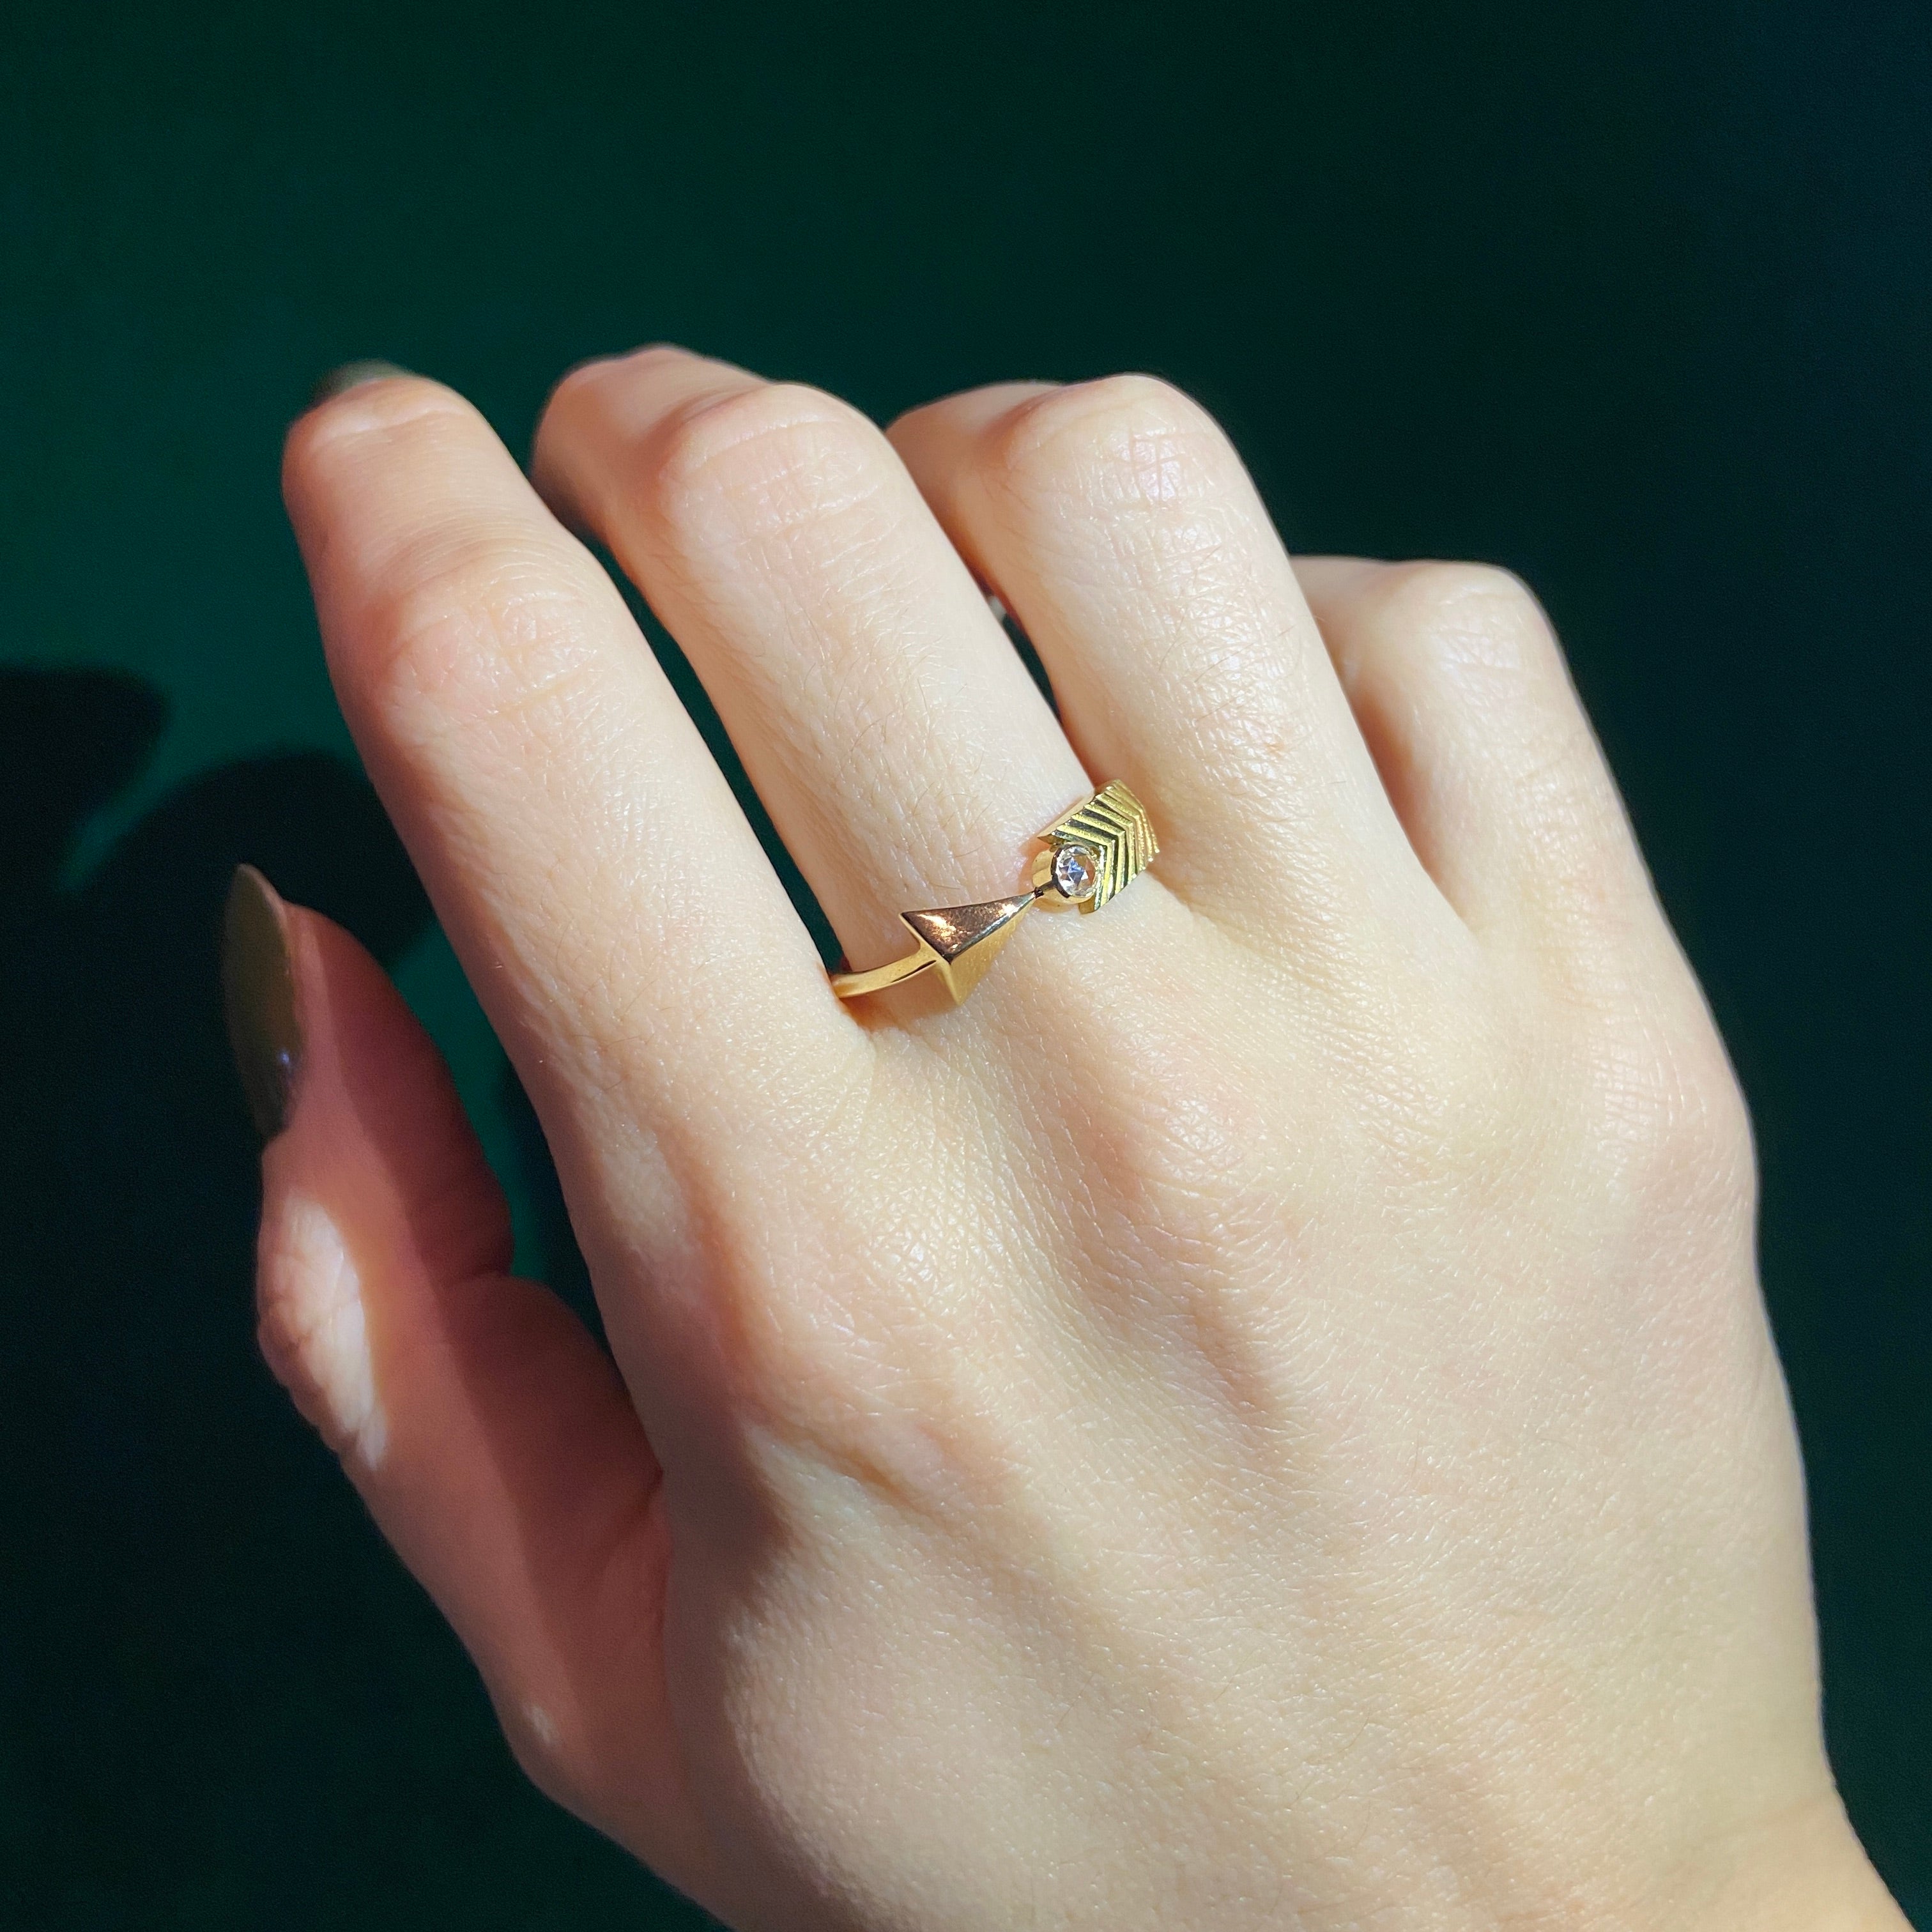 Cupids Arrow Ring in 18 karat yellow gold and a rose cut diamond by Solange Azagury-Partridge on hand